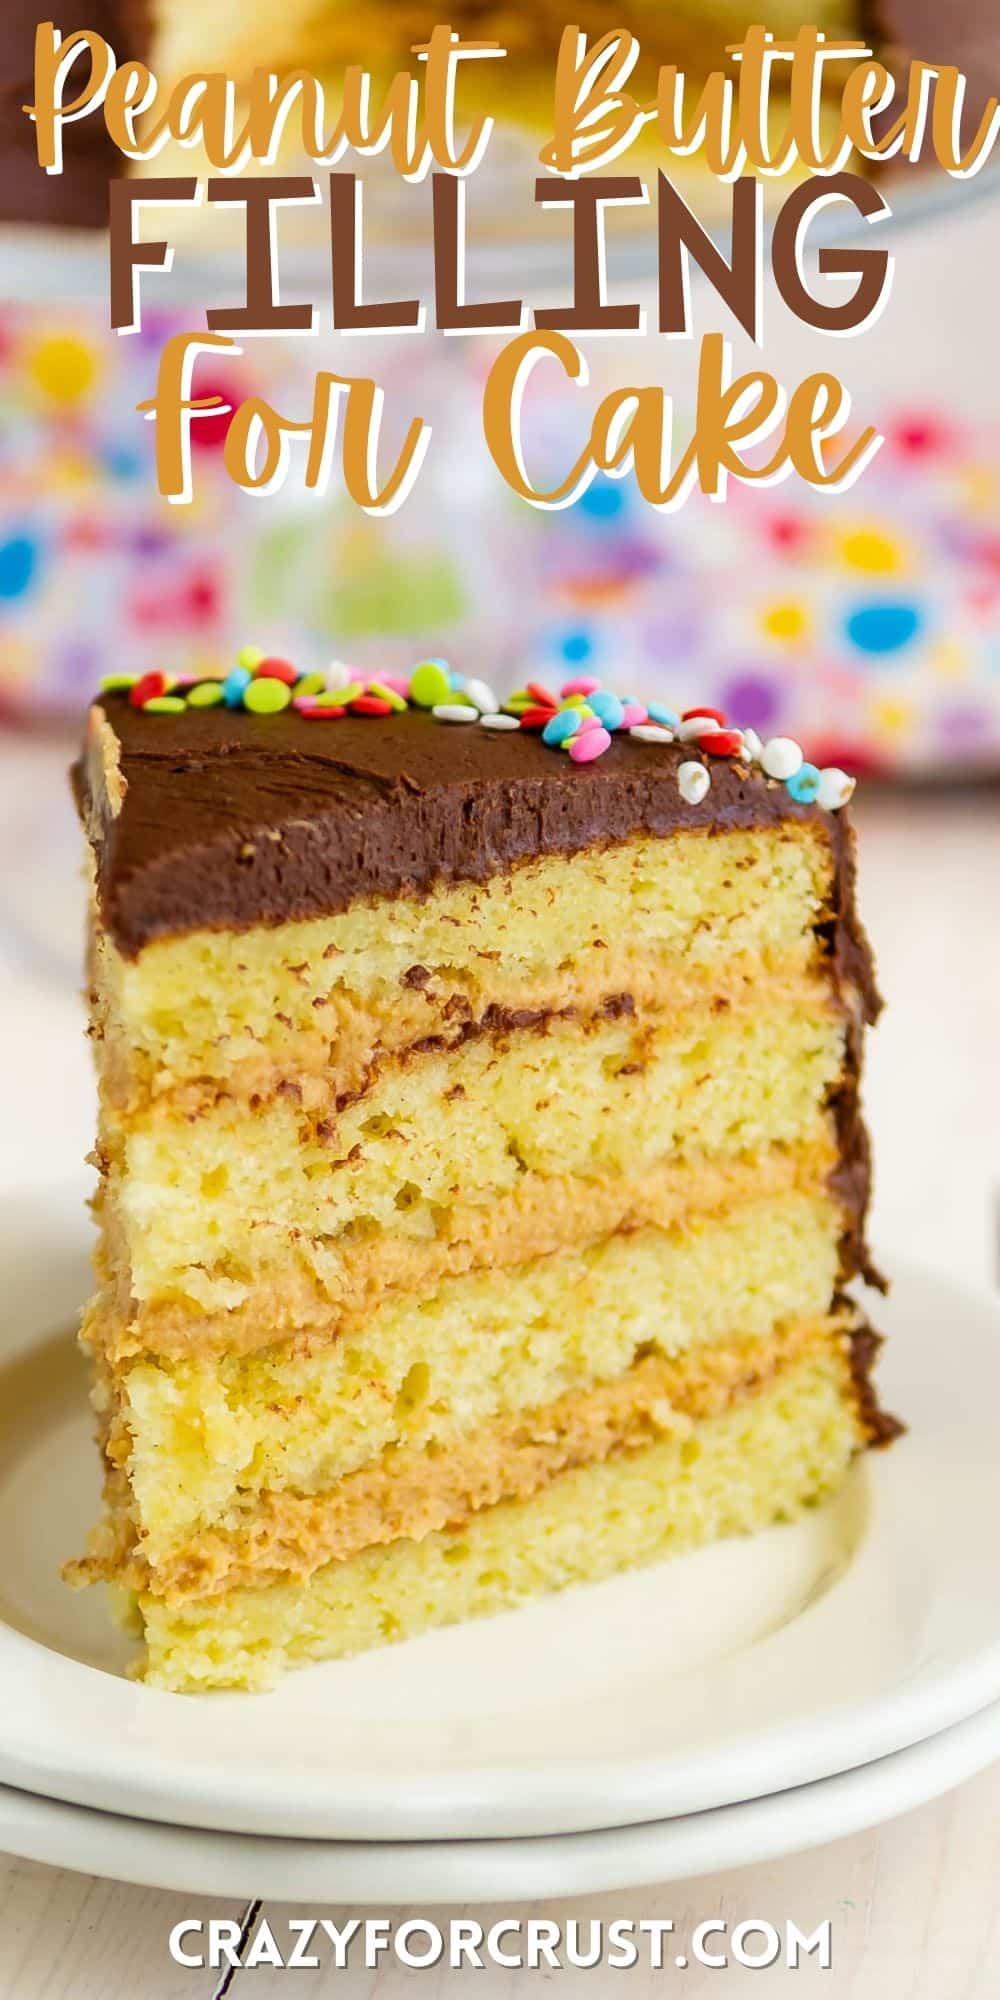 one slice of yellow cake with peanut butter frosting with words on the image.